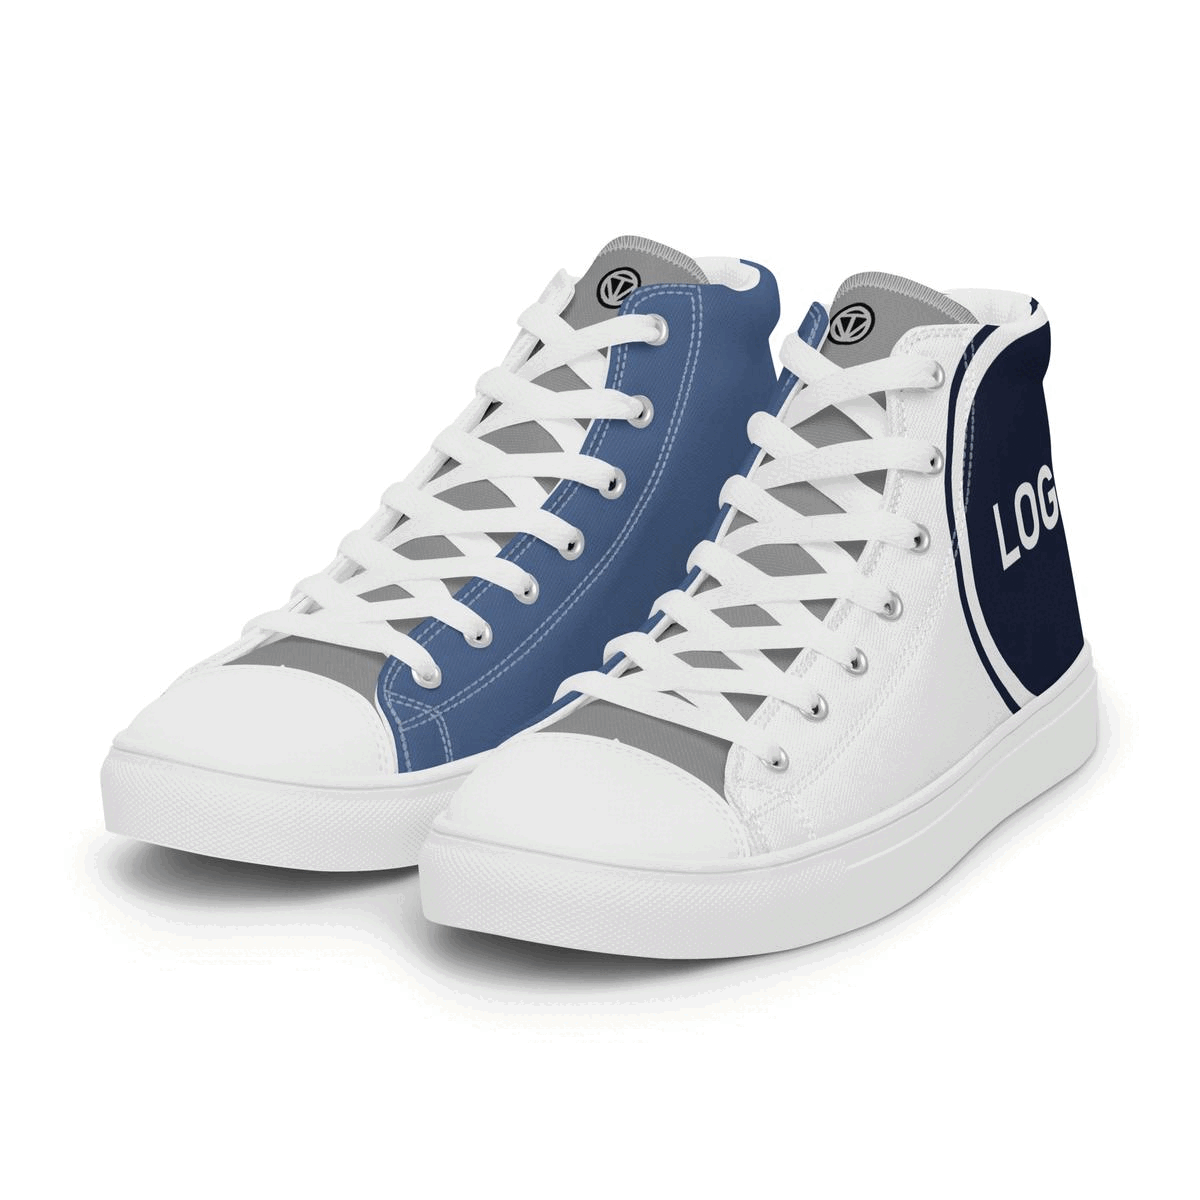 TIME OF VIBES - Men’s High Sneaker Demo CORPORATE - €129.00